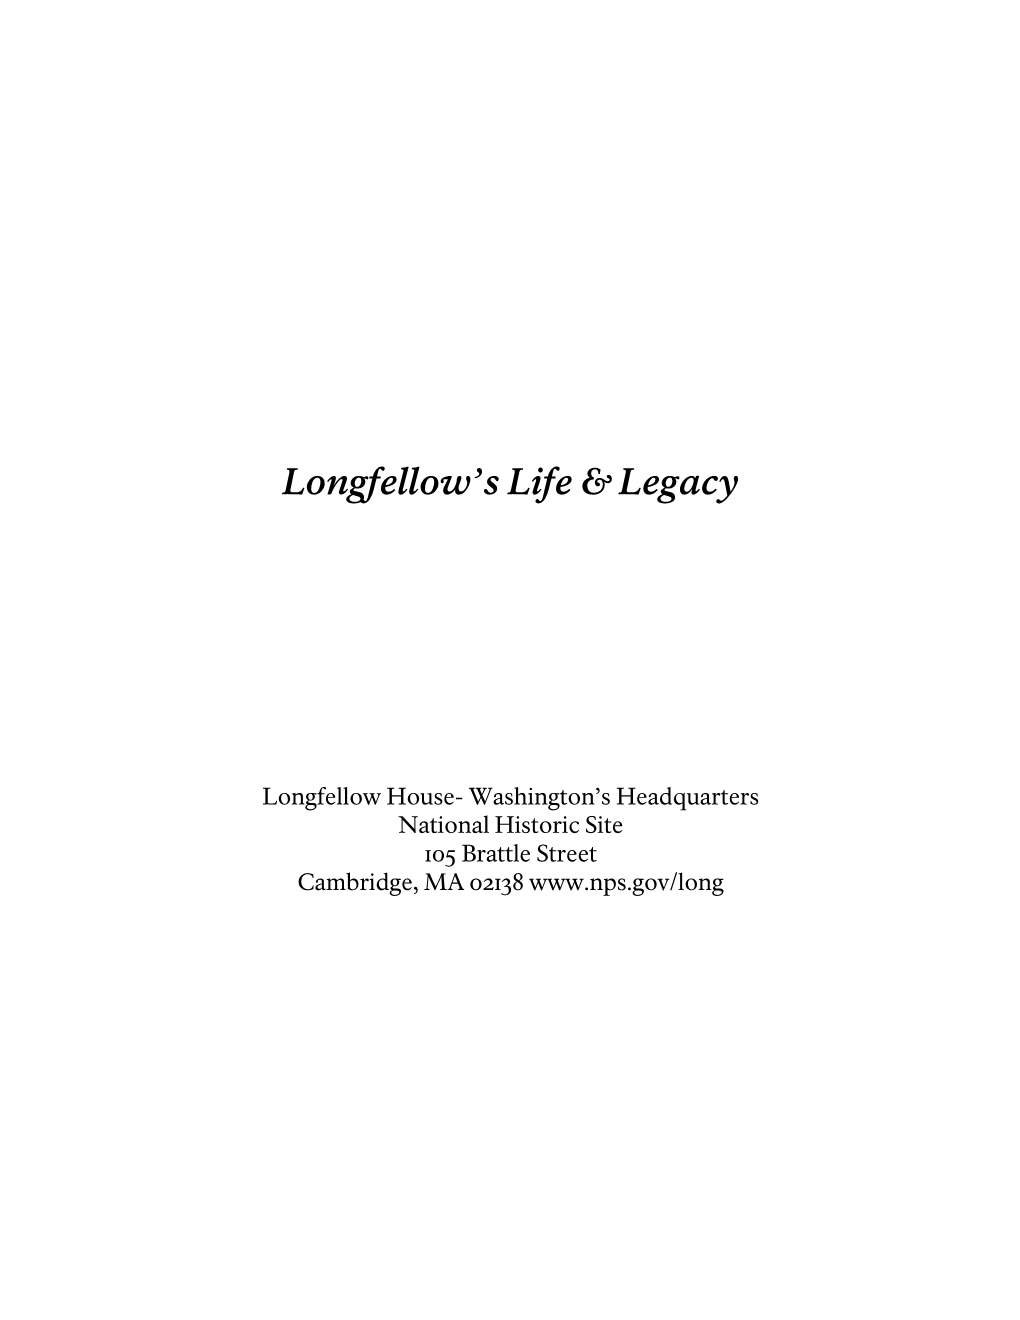 Longfellow's Life and Legacy